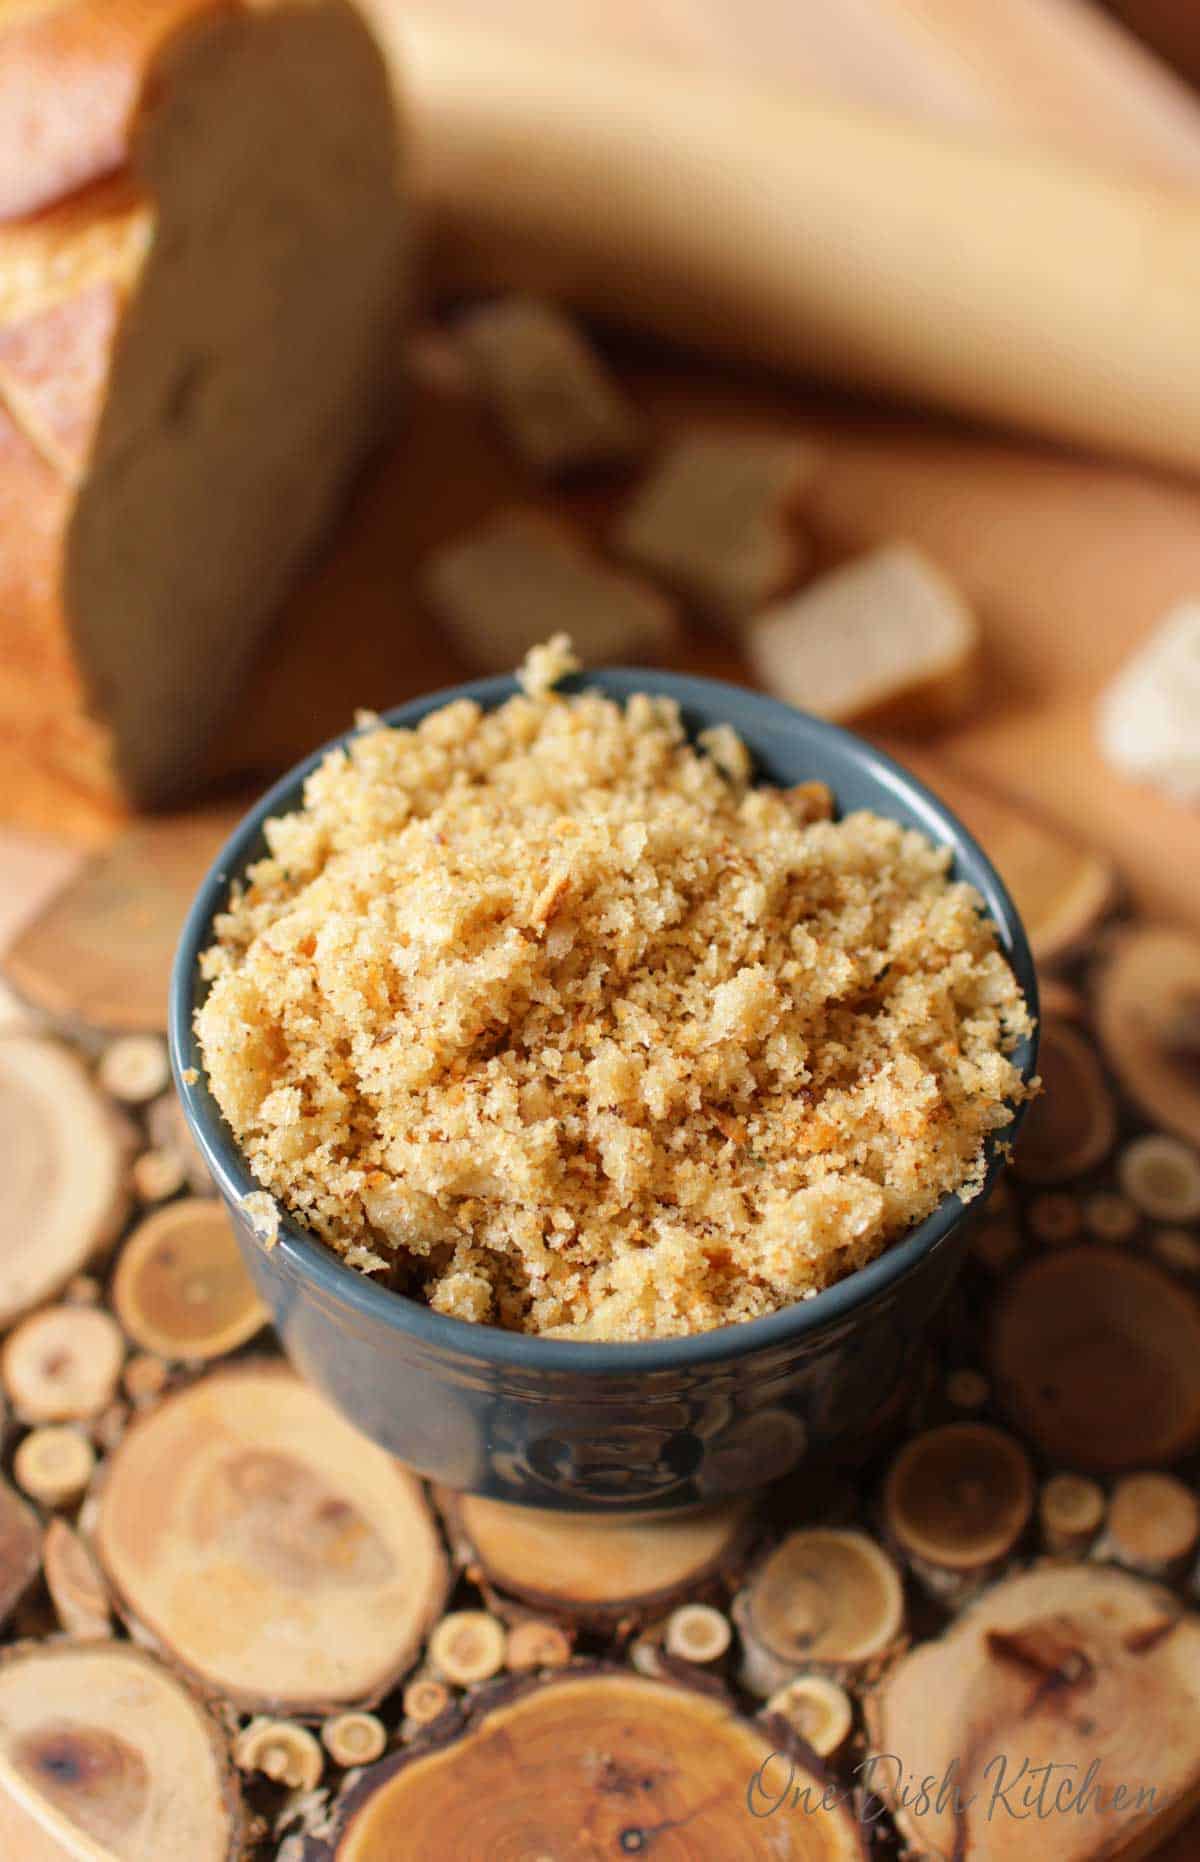 A small bowl of homemade breadcrumbs on a wooden trivet.